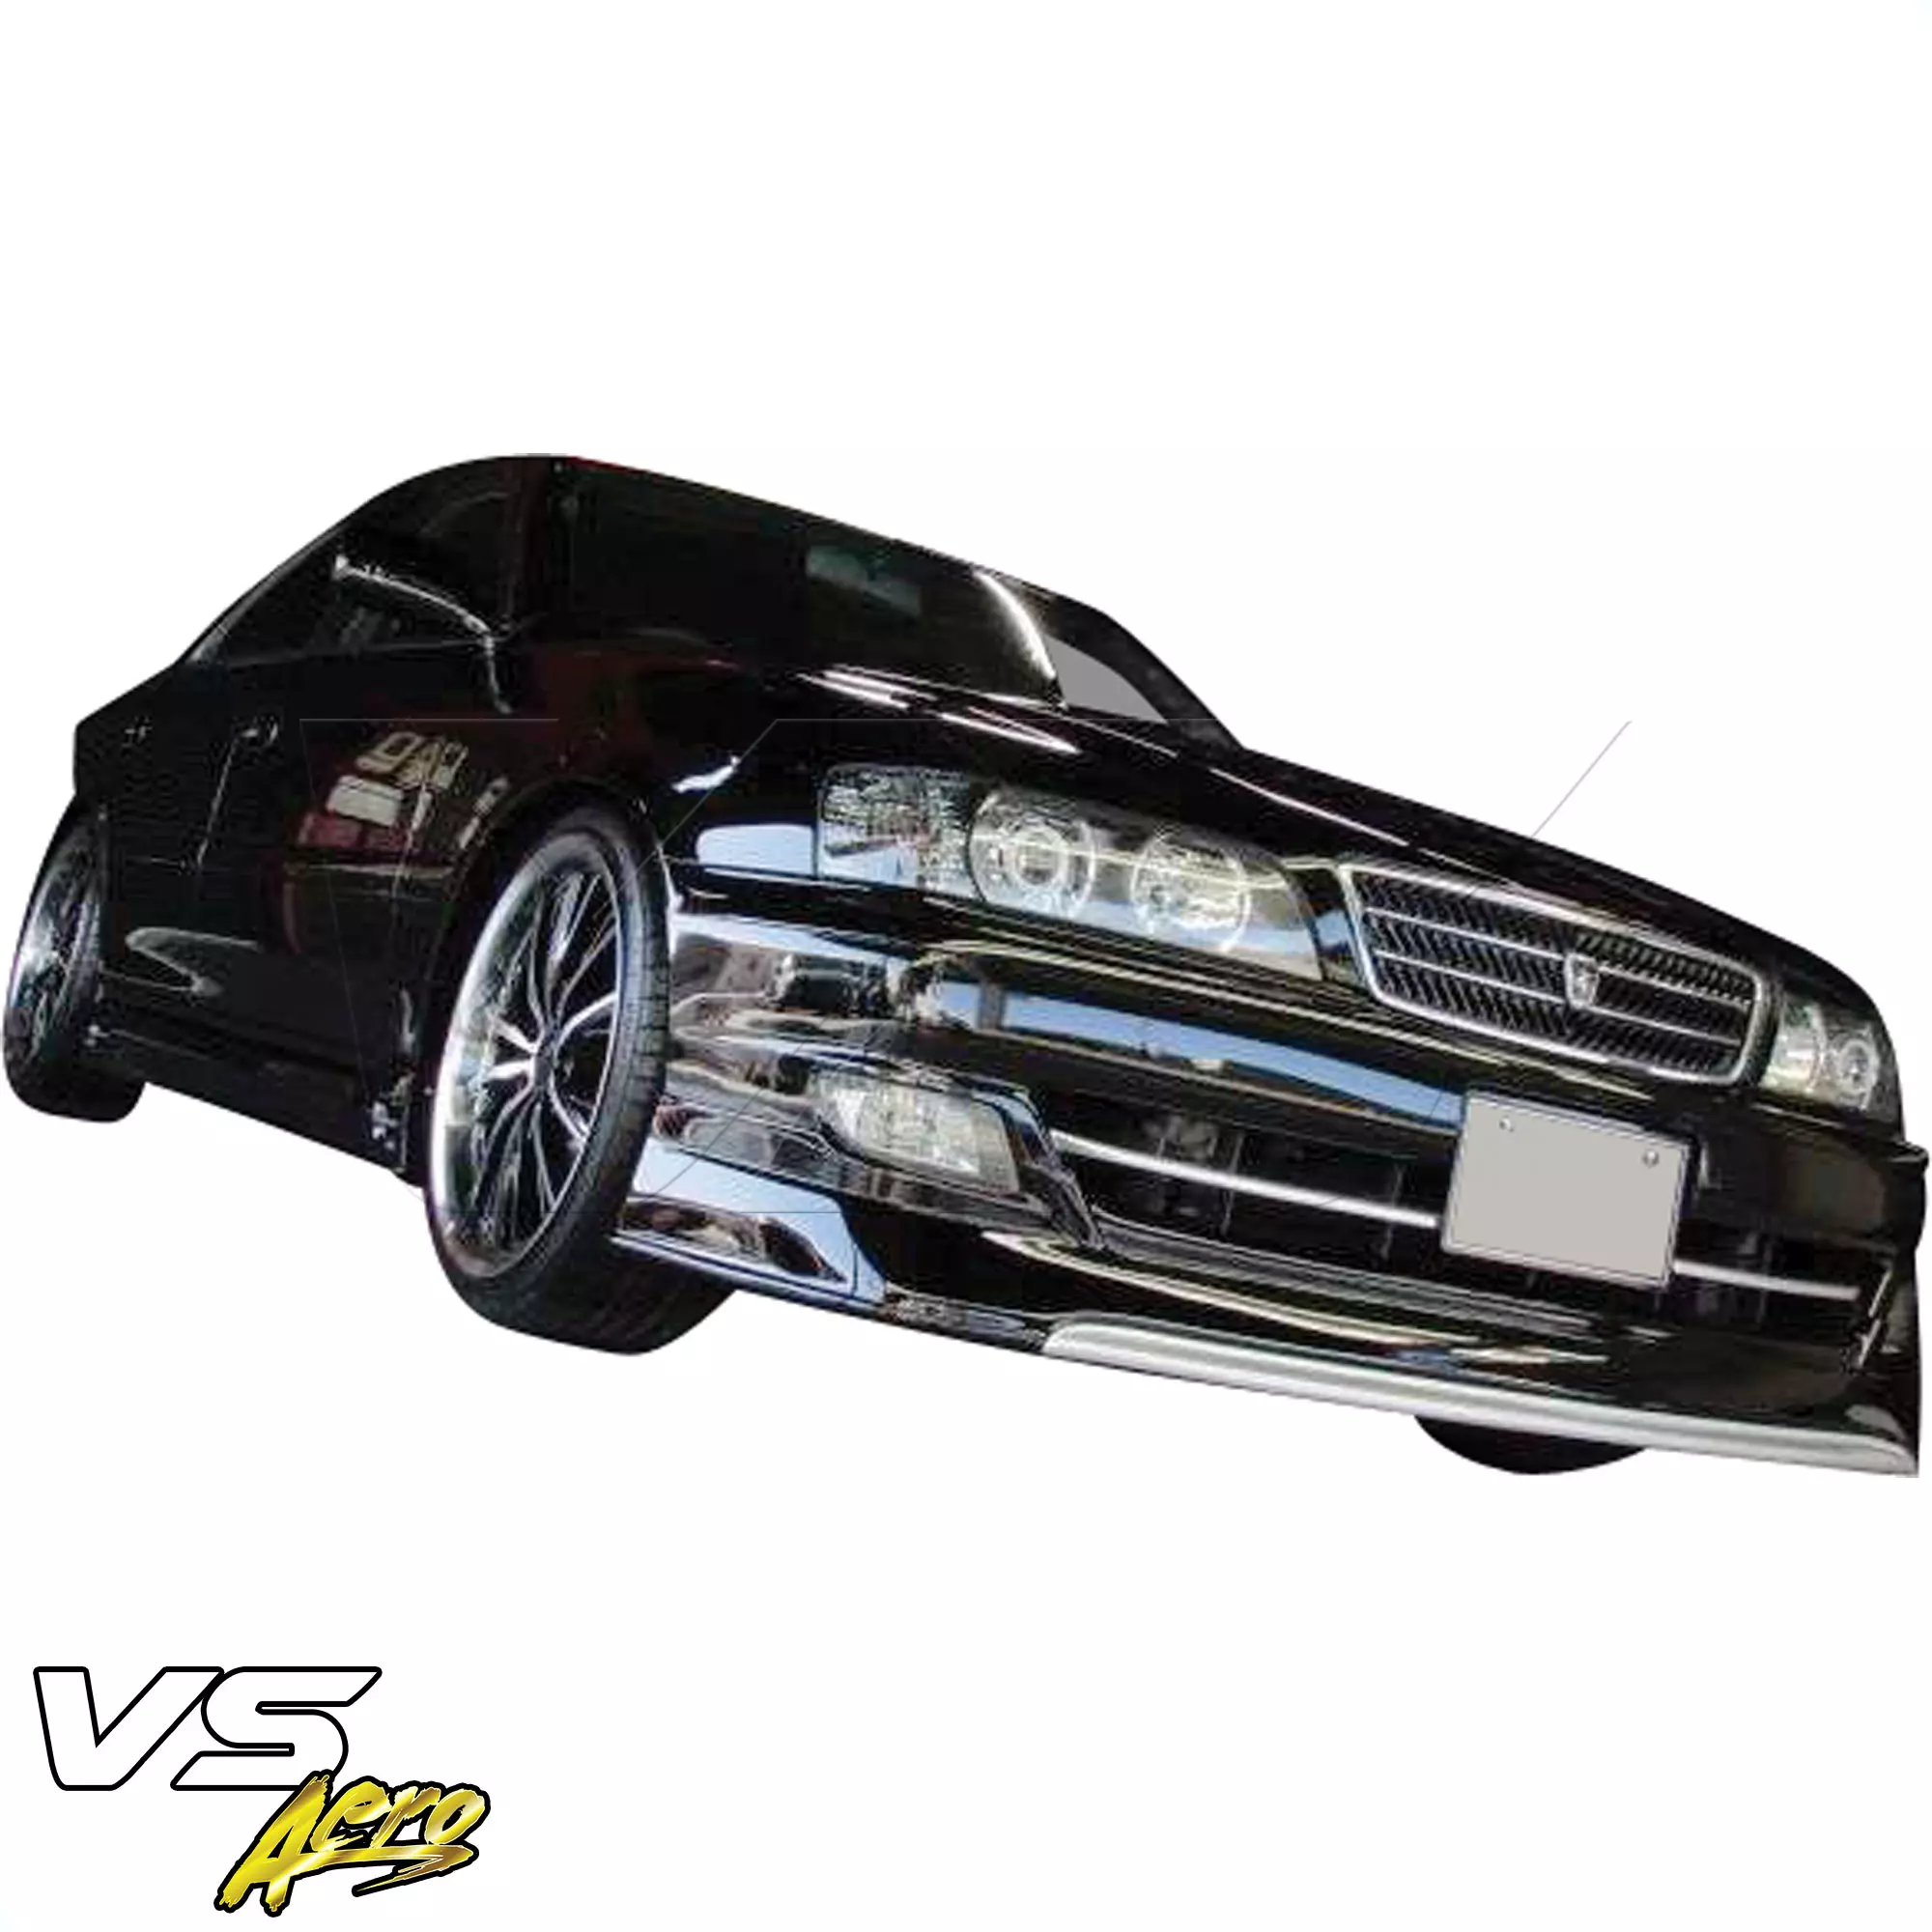 VSaero FRP TRAU Late Front Lip Valance > Toyota Chaser JZX100 1999-2000 - Image 20